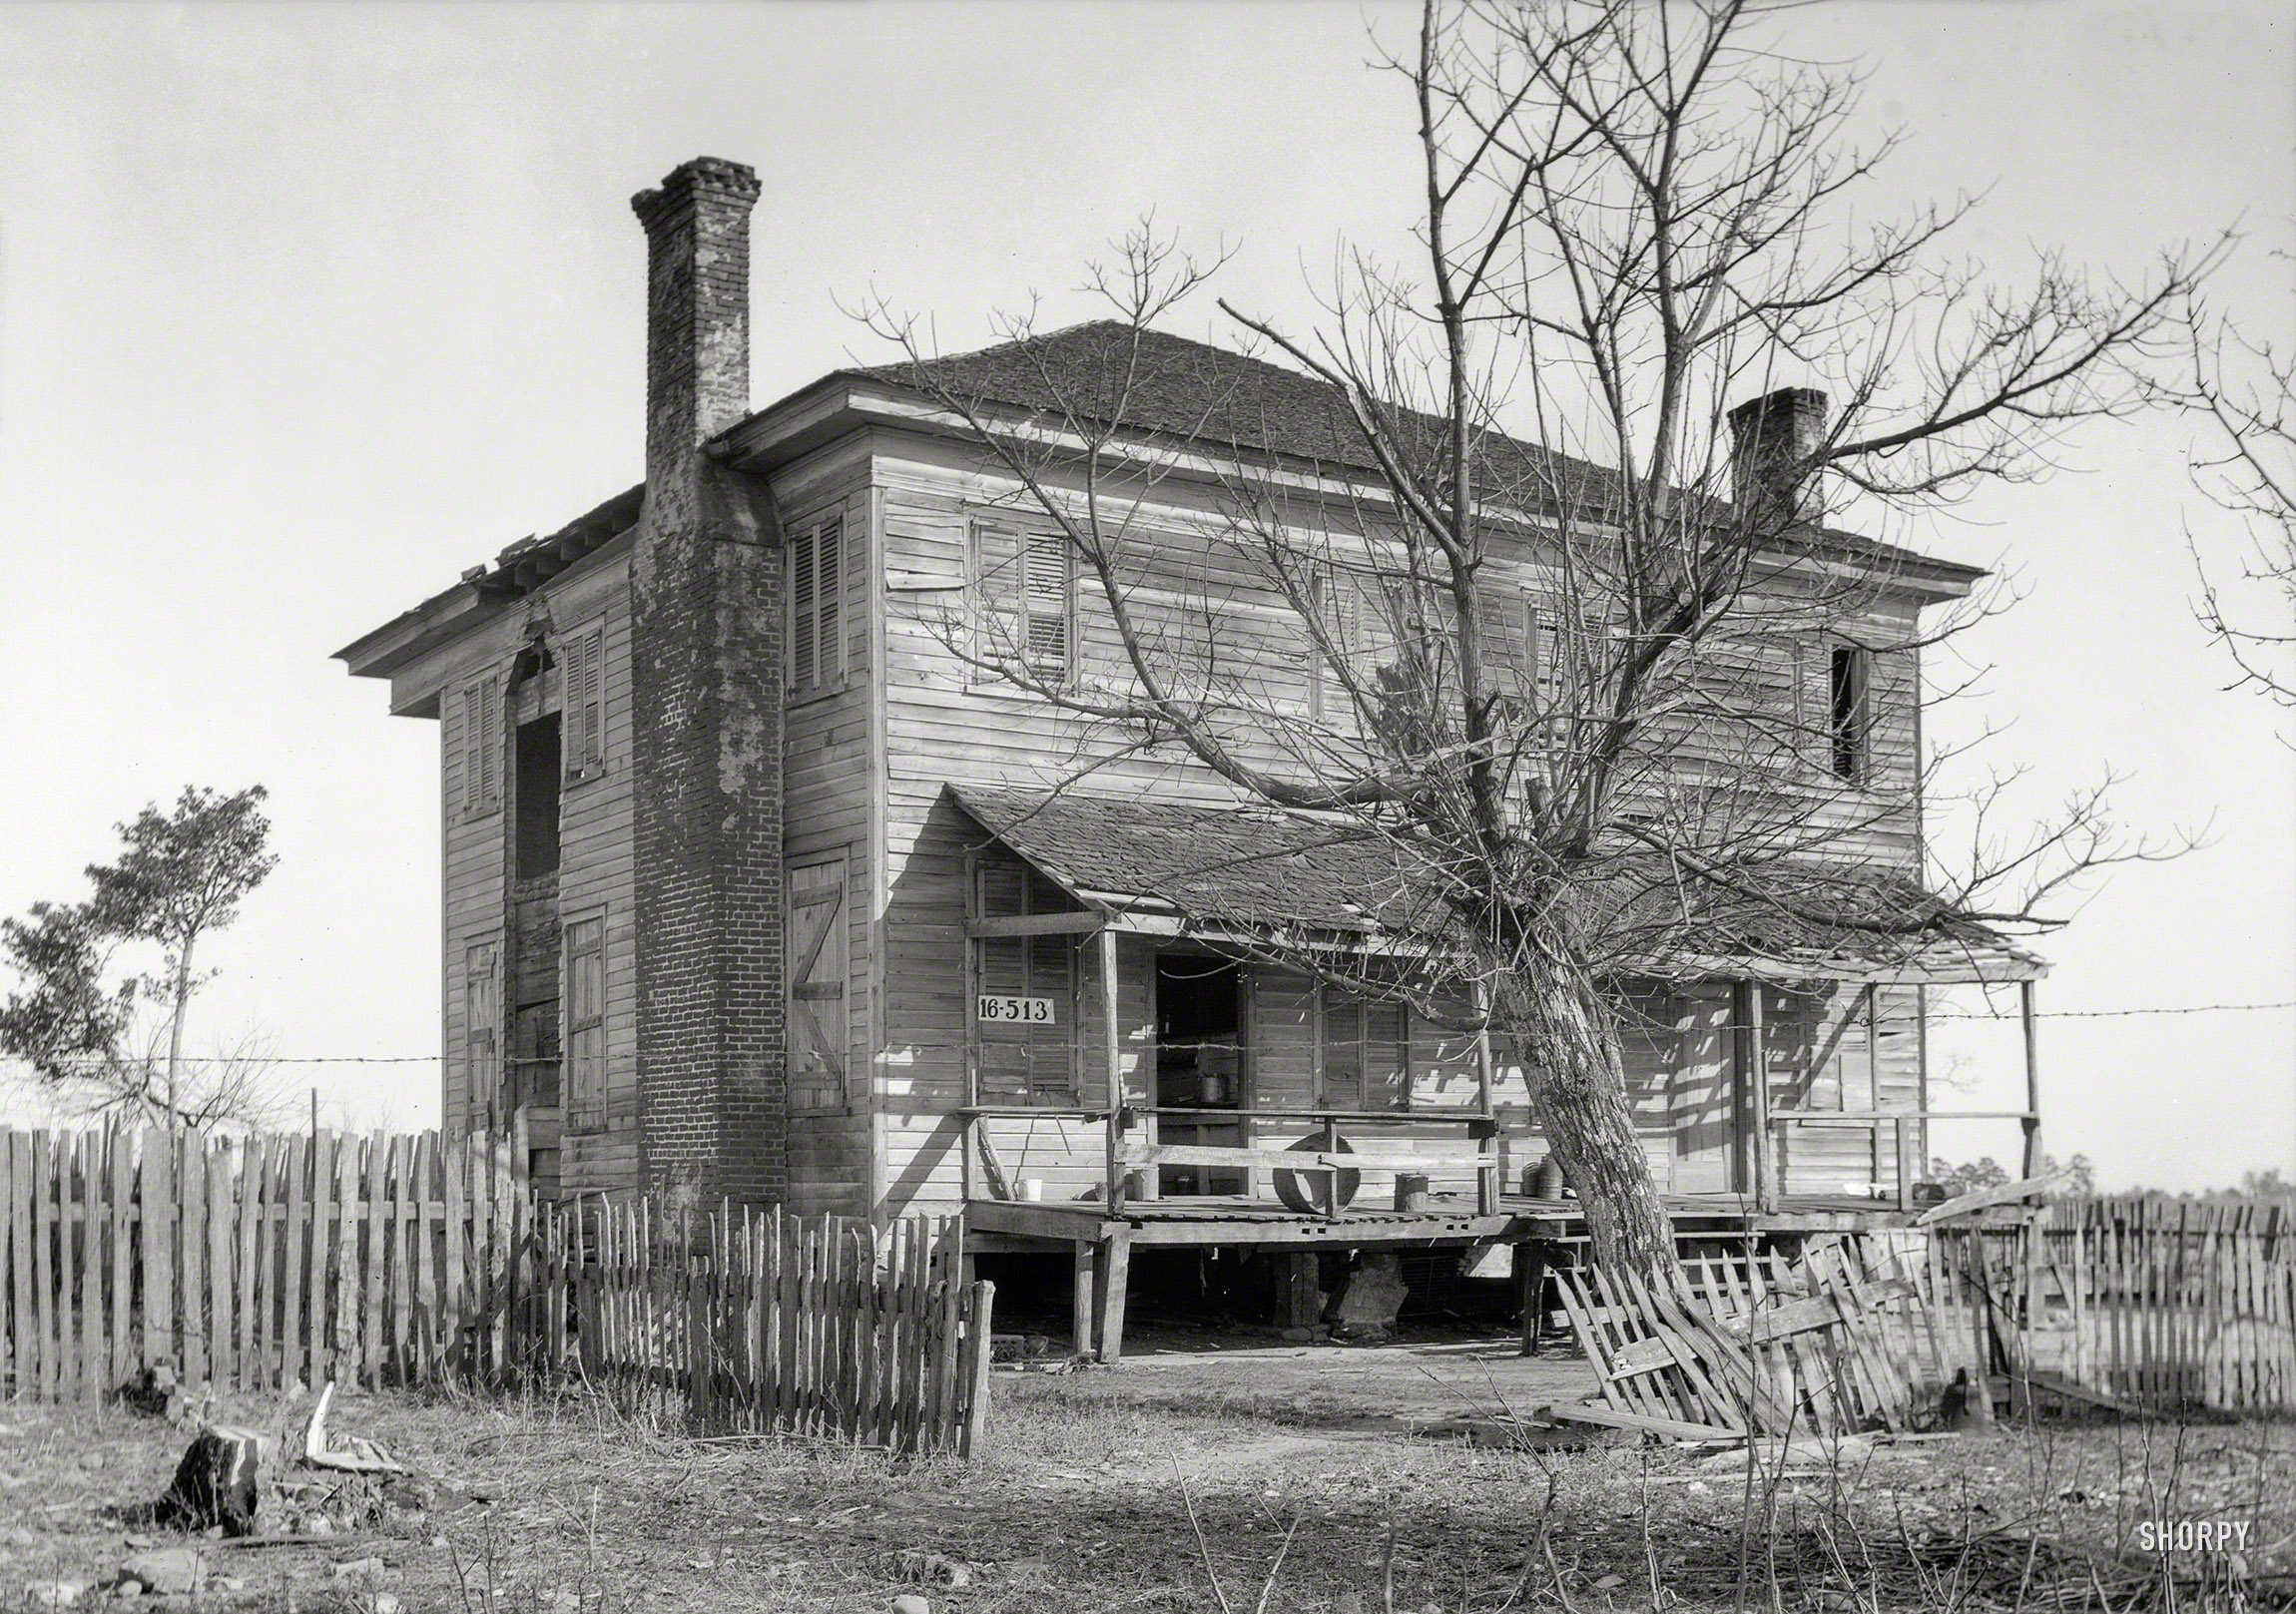 January 19, 1934. "West elevation, rear view, Hammack Plantation House, Waverly Road. Two miles from Loachapoka, Lee County, Alabama. This old plantation house is, today, just a mass of ruins. It is not occupied." Photo by W.N. Manning for the Historic American Buildings Survey. View full size.